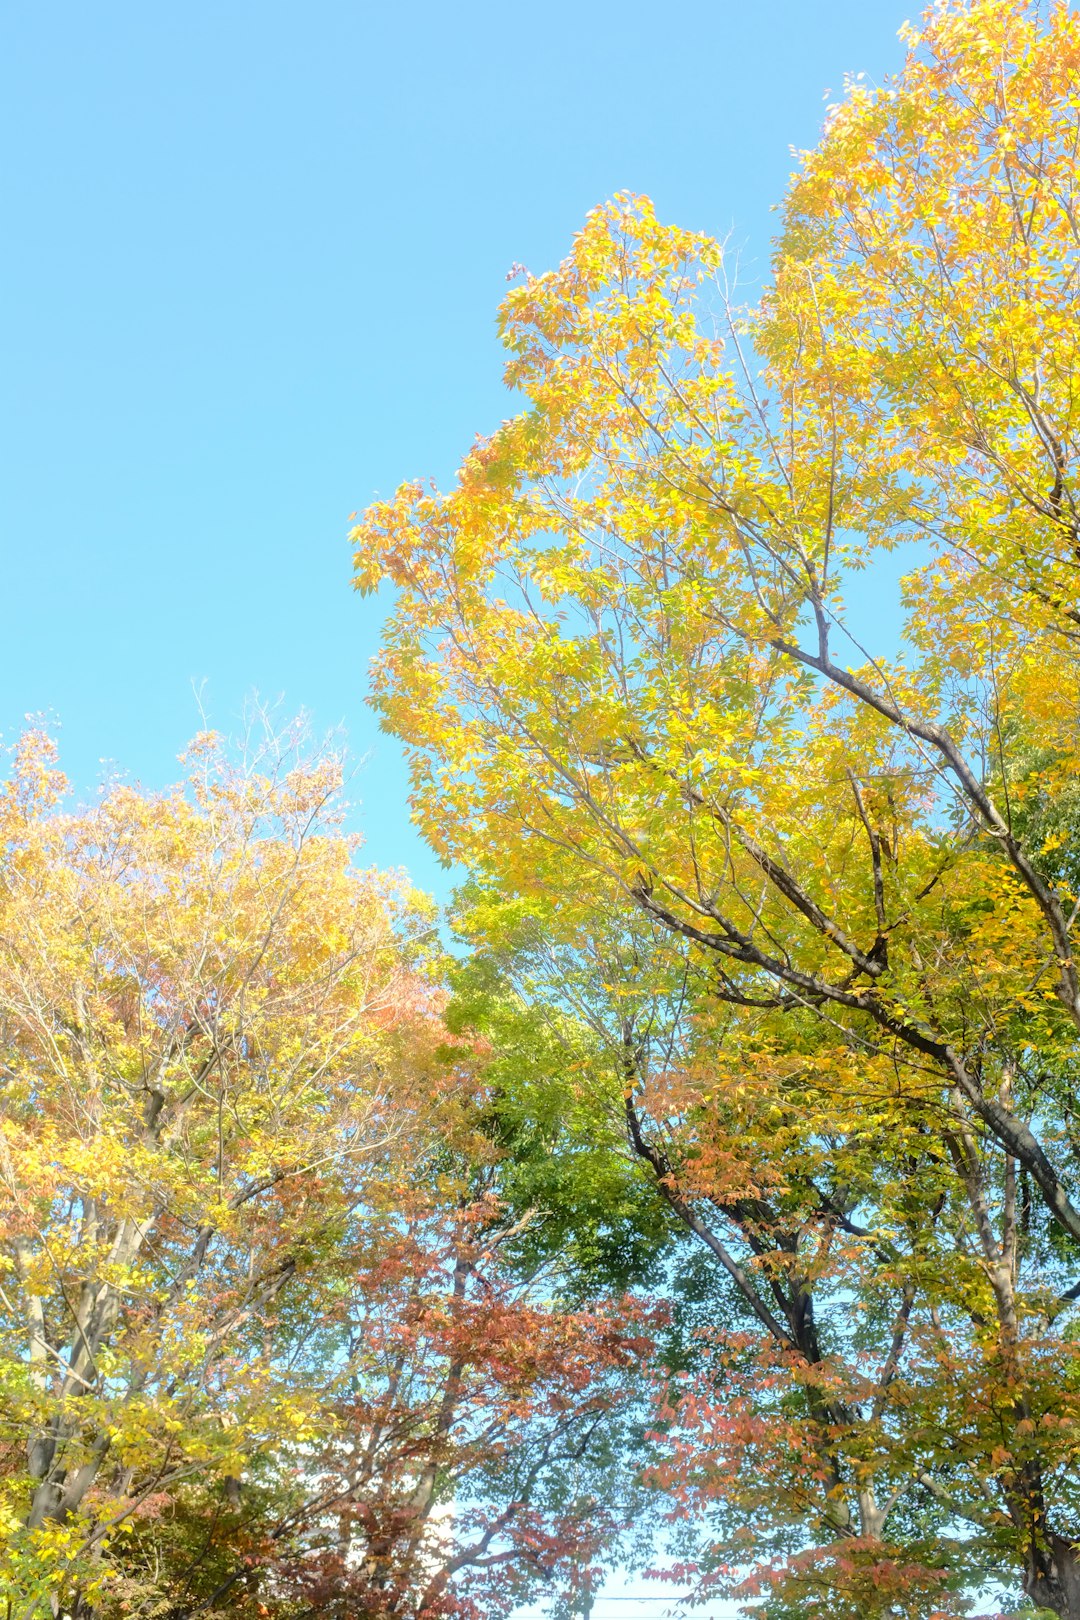 yellow and green leaf trees under blue sky during daytime